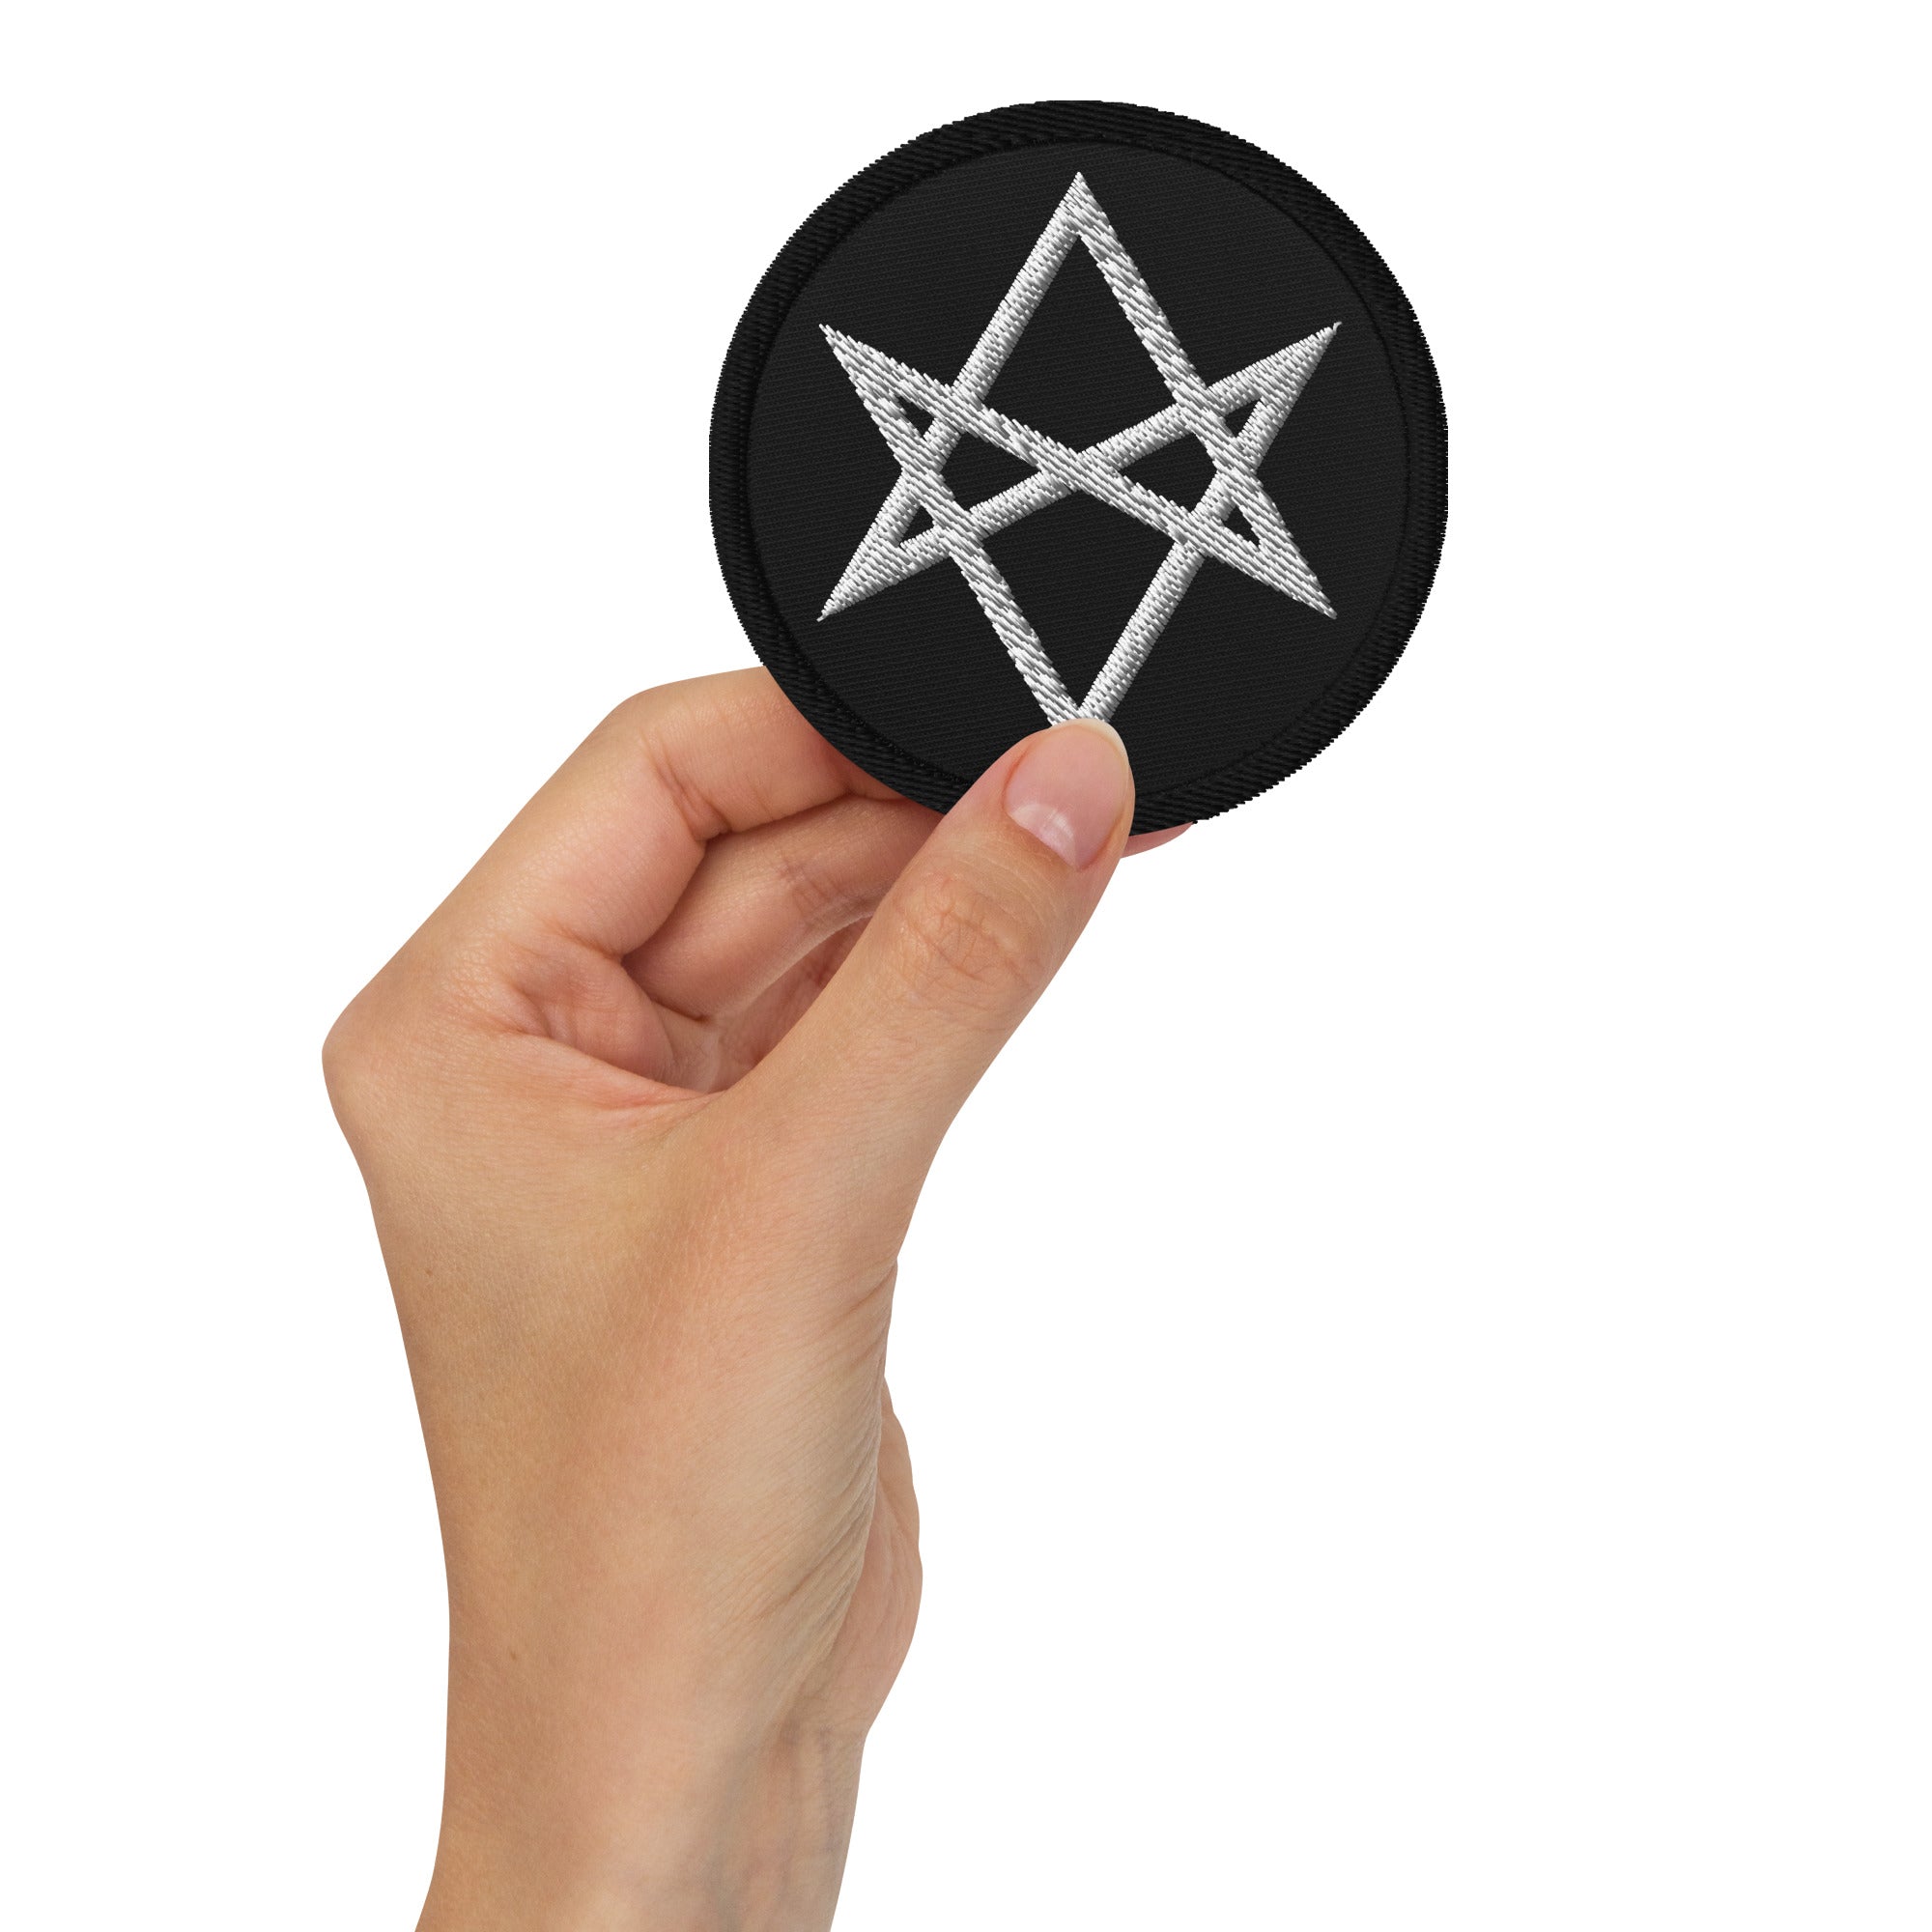 Unicursal Hexagram Six Pointed Star Occult Symbol Embroidered Patch - Edge of Life Designs